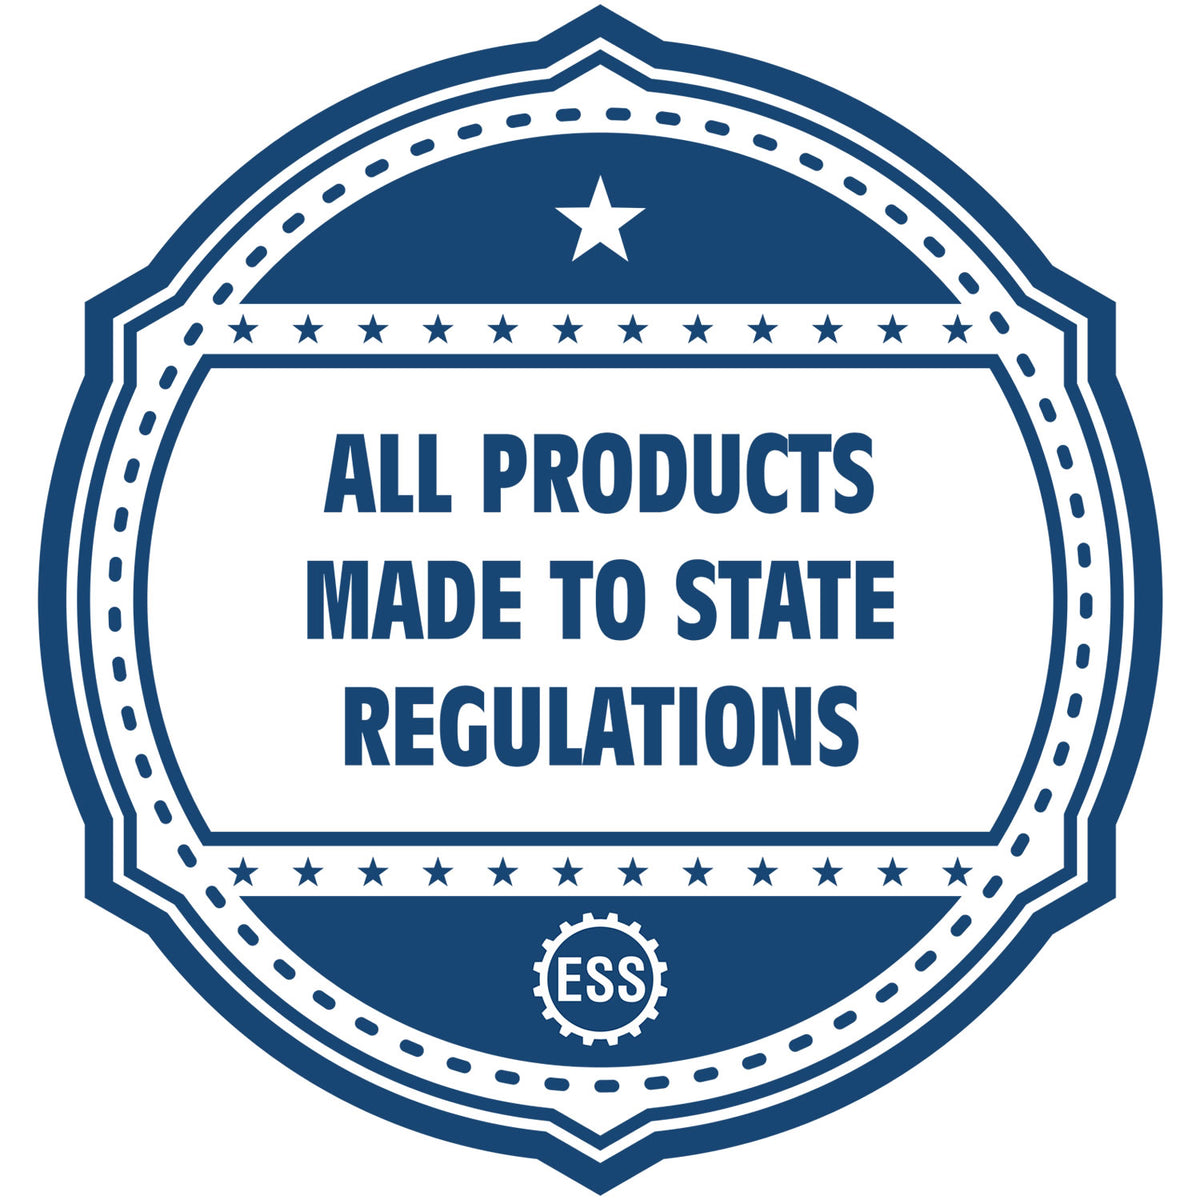 An icon or badge element for the Super Slim Alabama Notary Public Stamp showing that this product is made in compliance with state regulations.